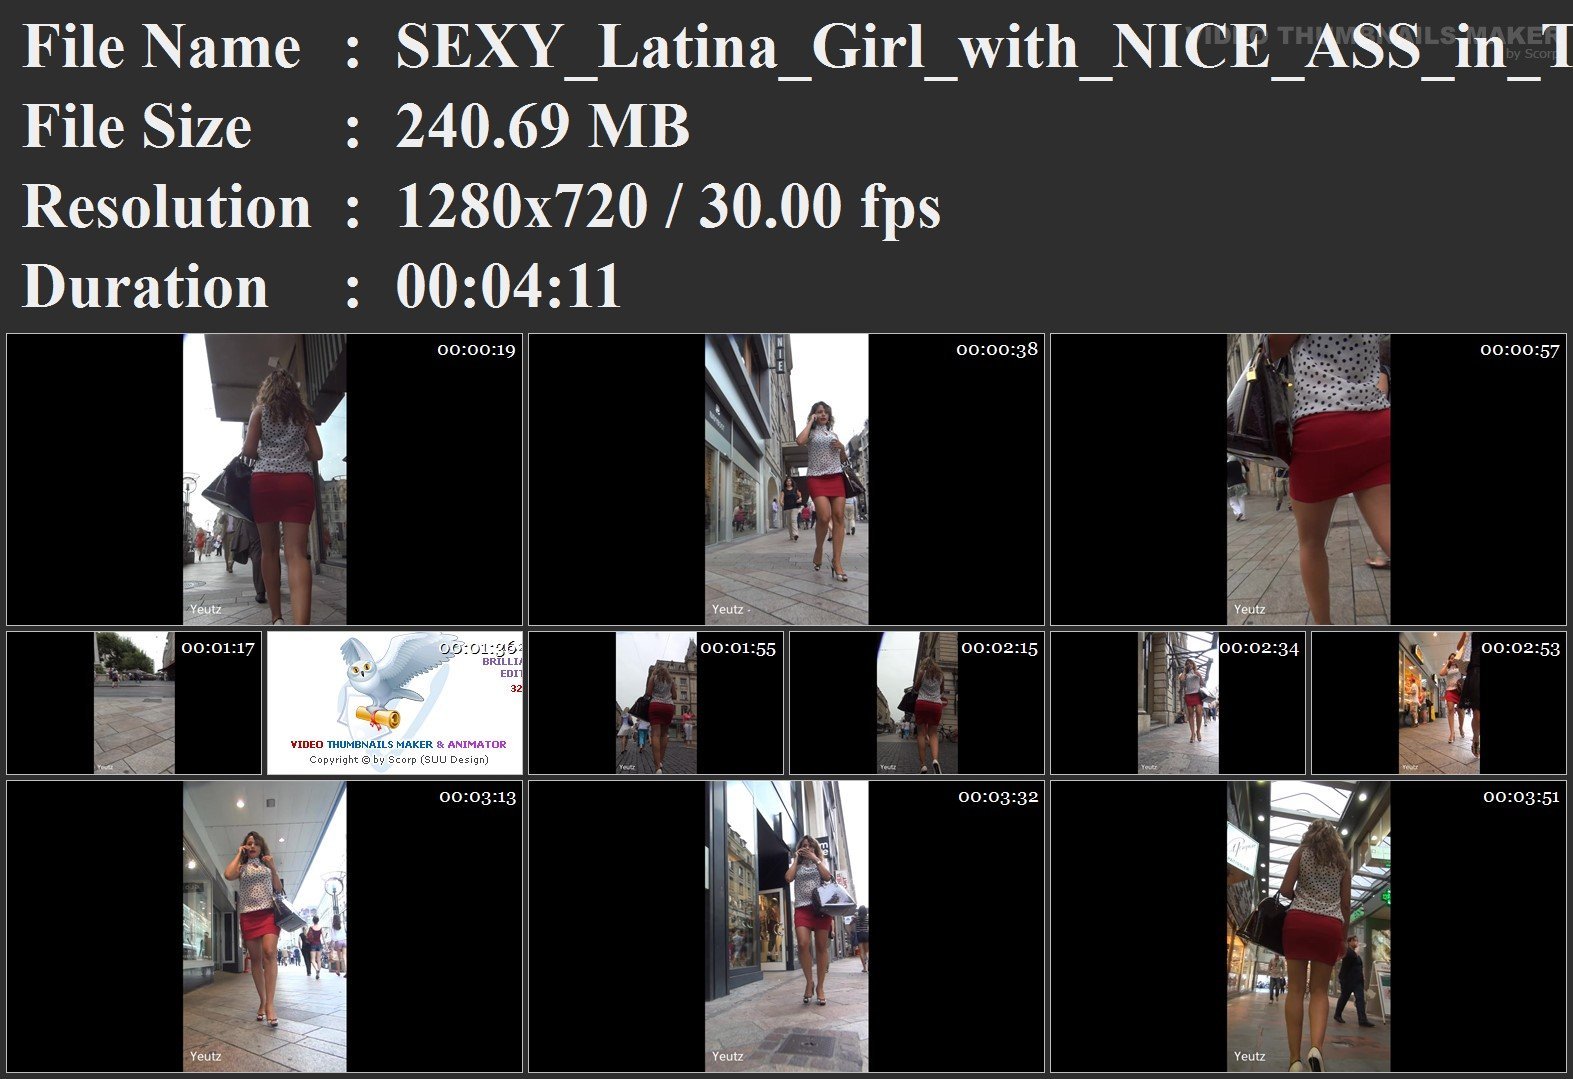 SEXY_Latina_Girl_with_NICE_ASS_in_Tight_RED_Skirt___High_Heels_-_Yeutz.mp4.jpg